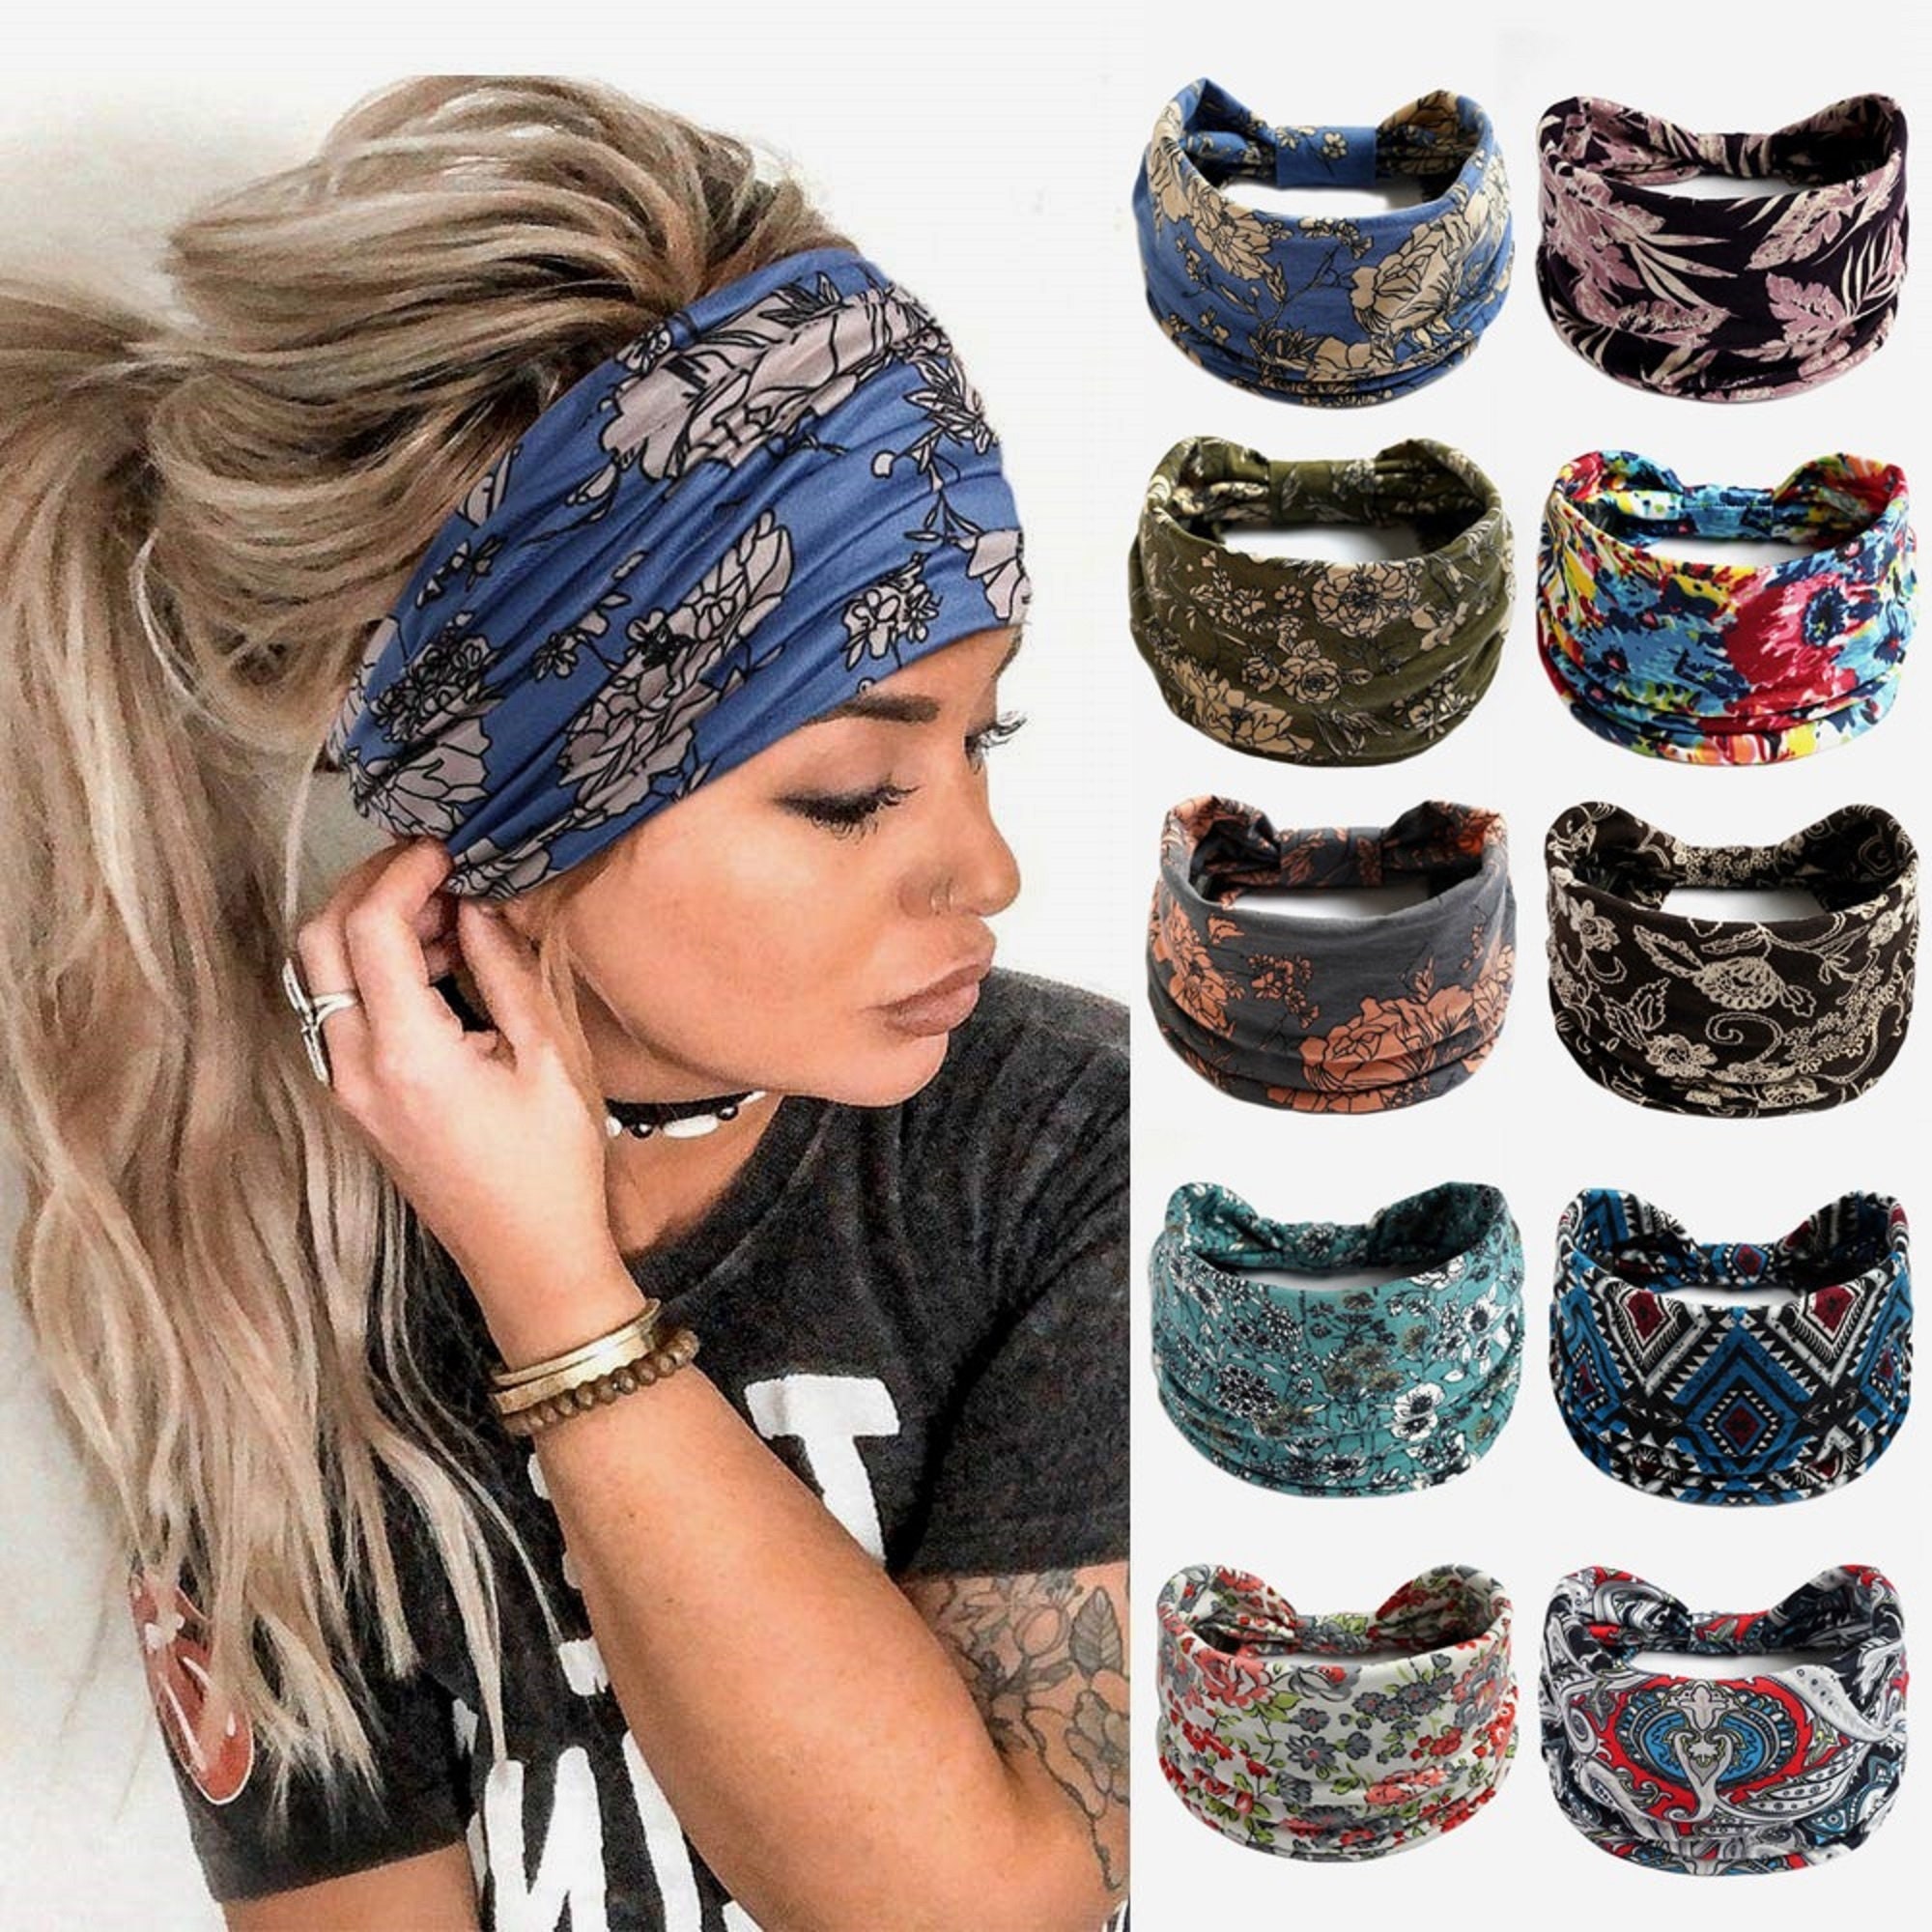 kuou Elastic Bandana Headband,Soft and Comfortable Wide Stretchy Headwrap for Women and Men 